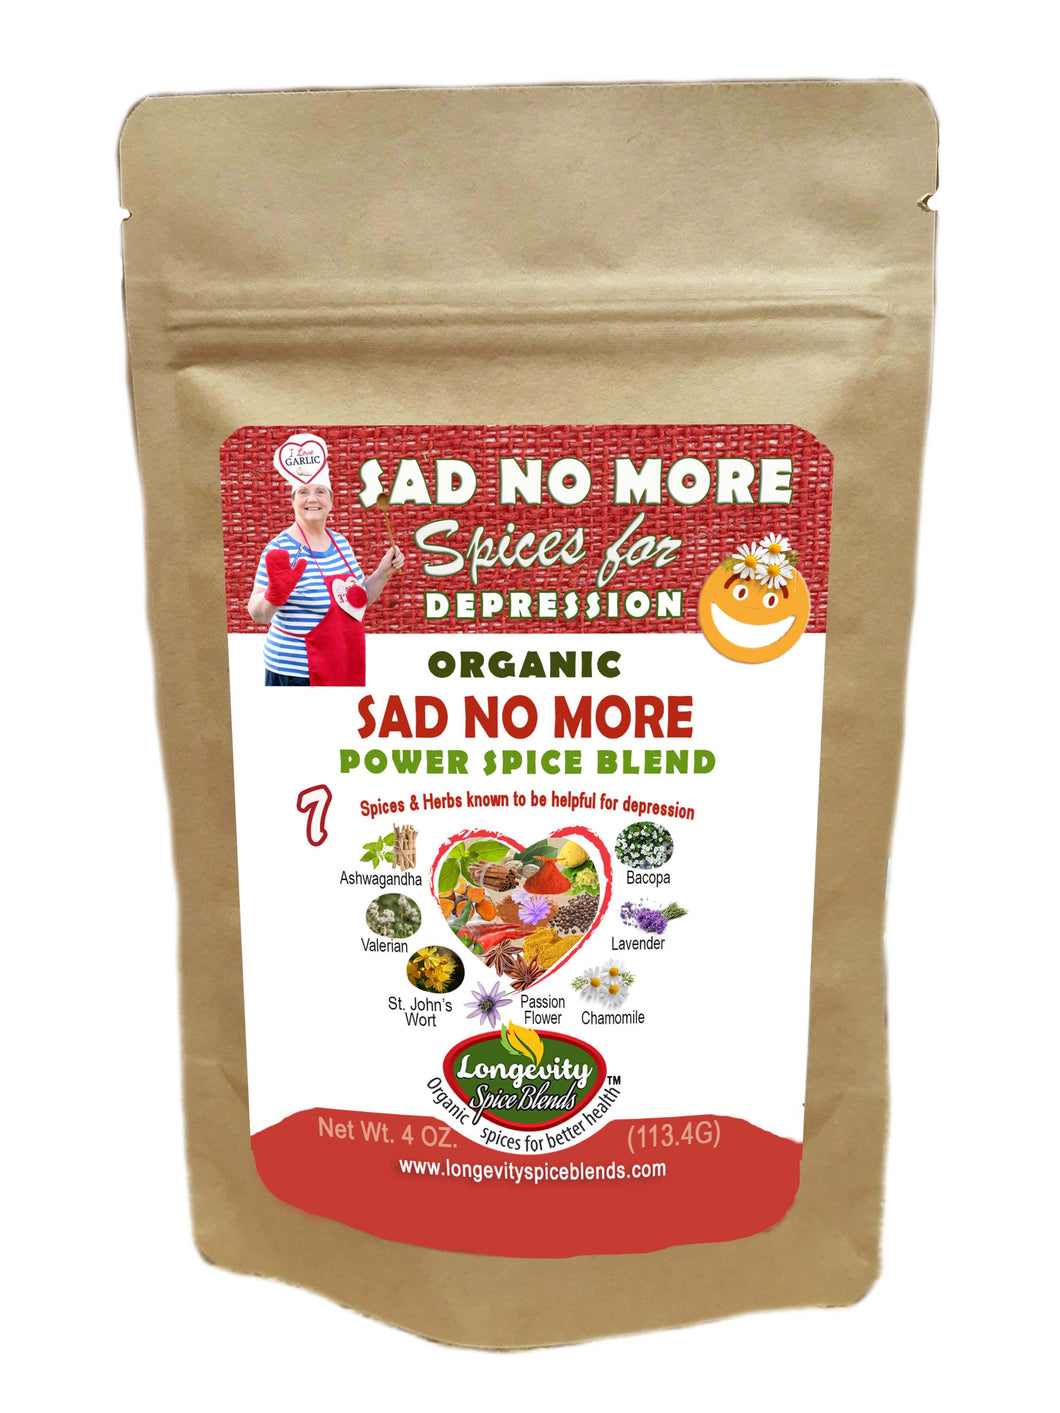 Depression| Sad No More - Help for Depression, Elevate Mood Naturally with Spices & Herbs